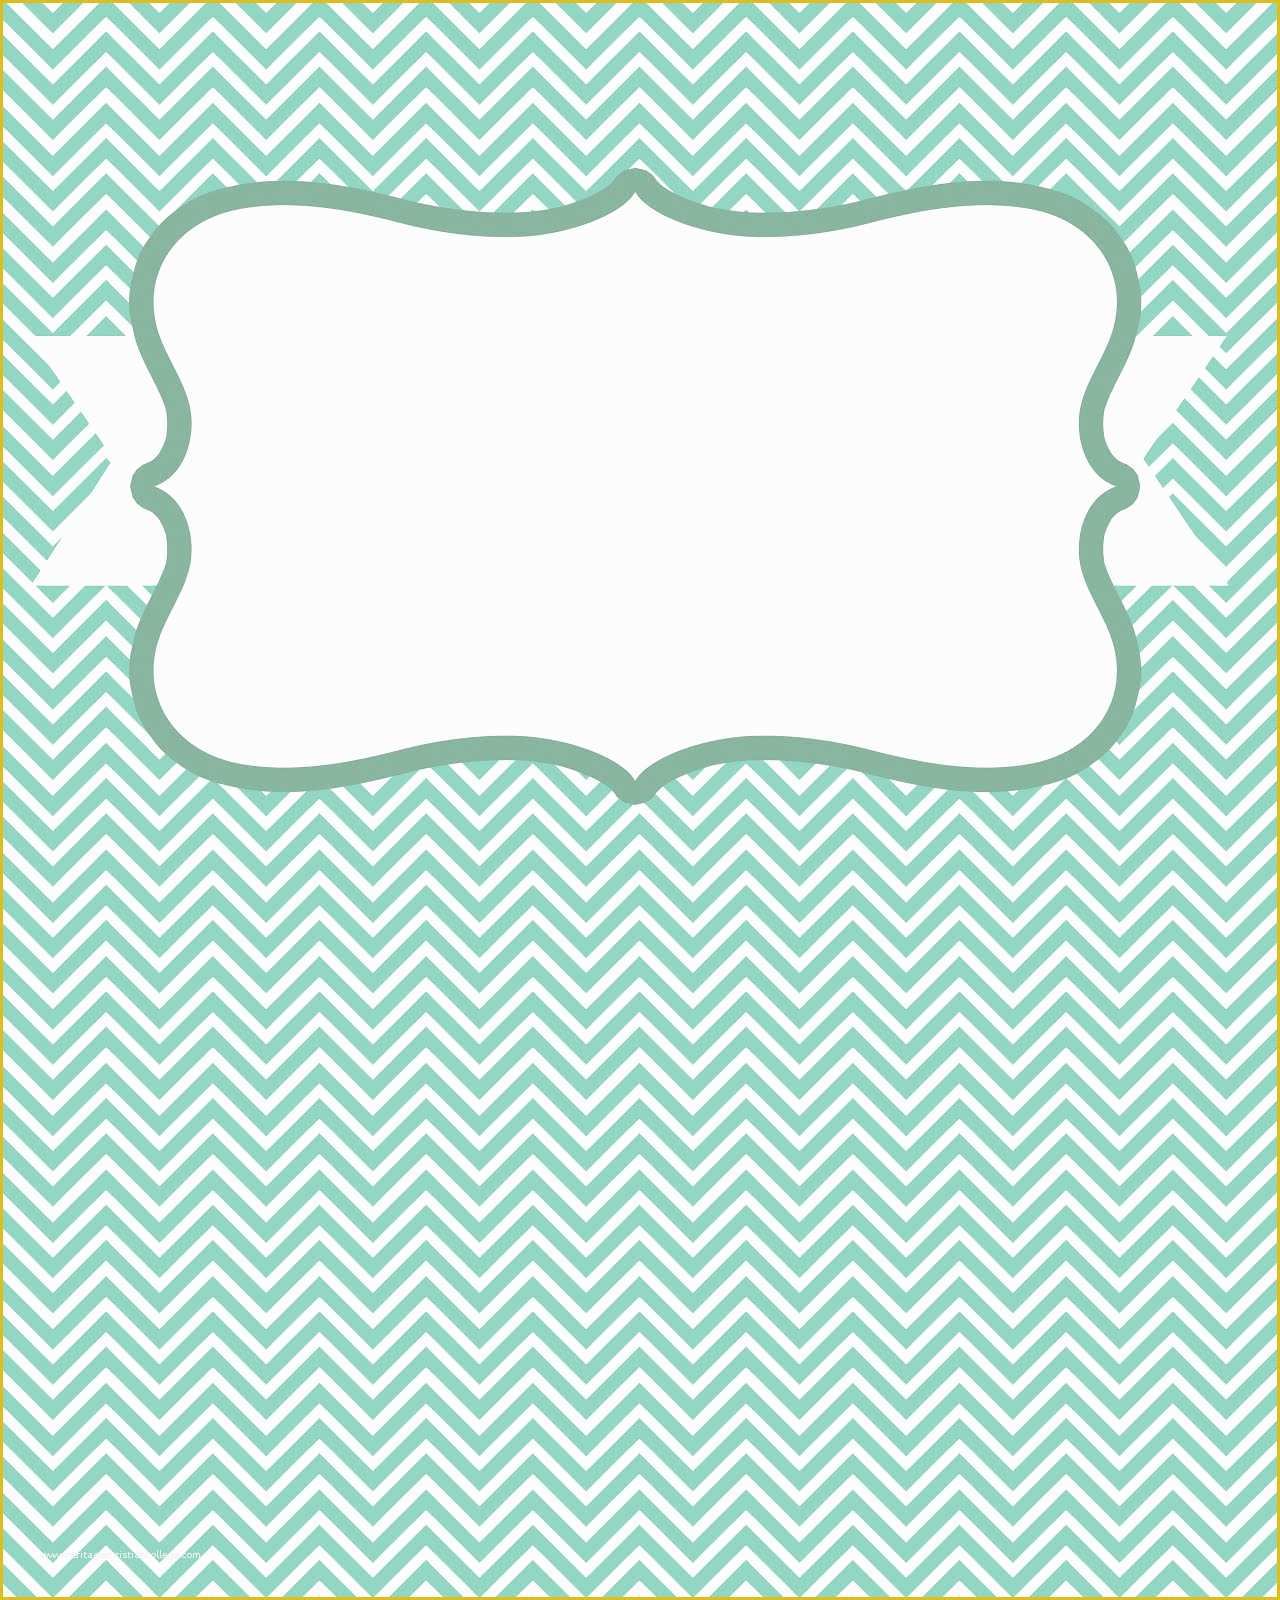 Free Binder Cover Templates Of 8 Best Of Blank Chevron Binder Cover Printables